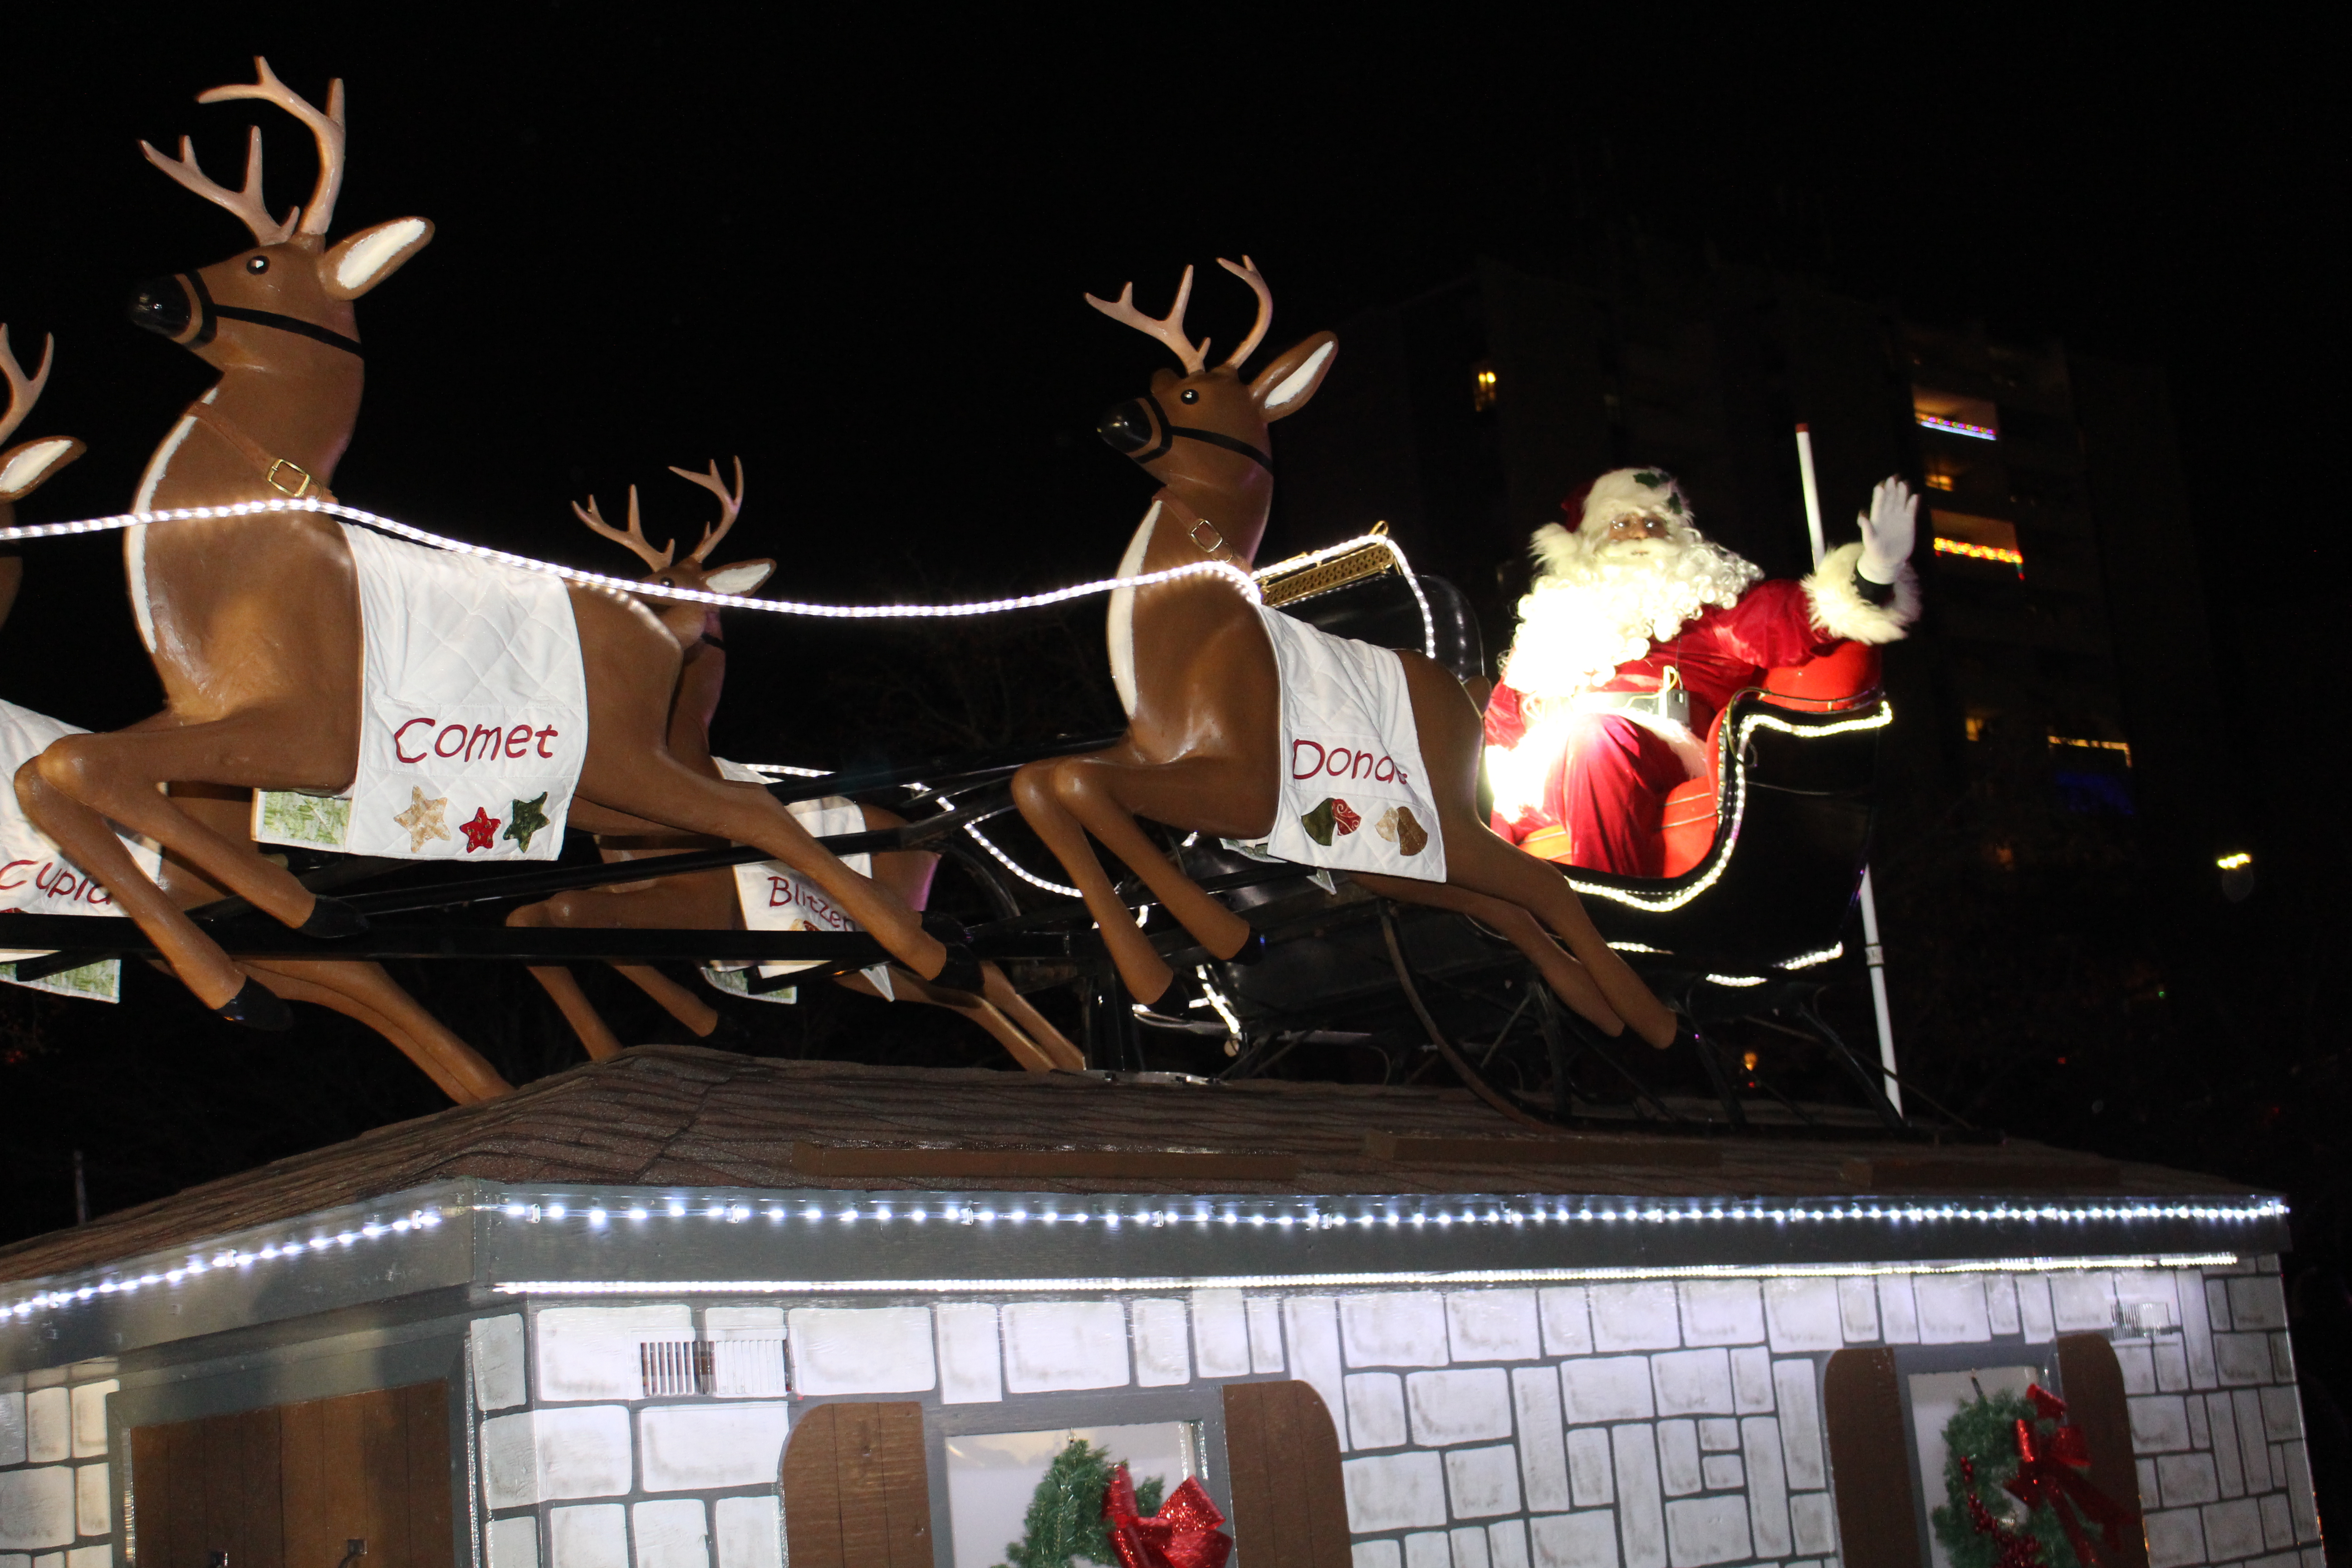 Santa in his slay with two reindeer on the roof of a house